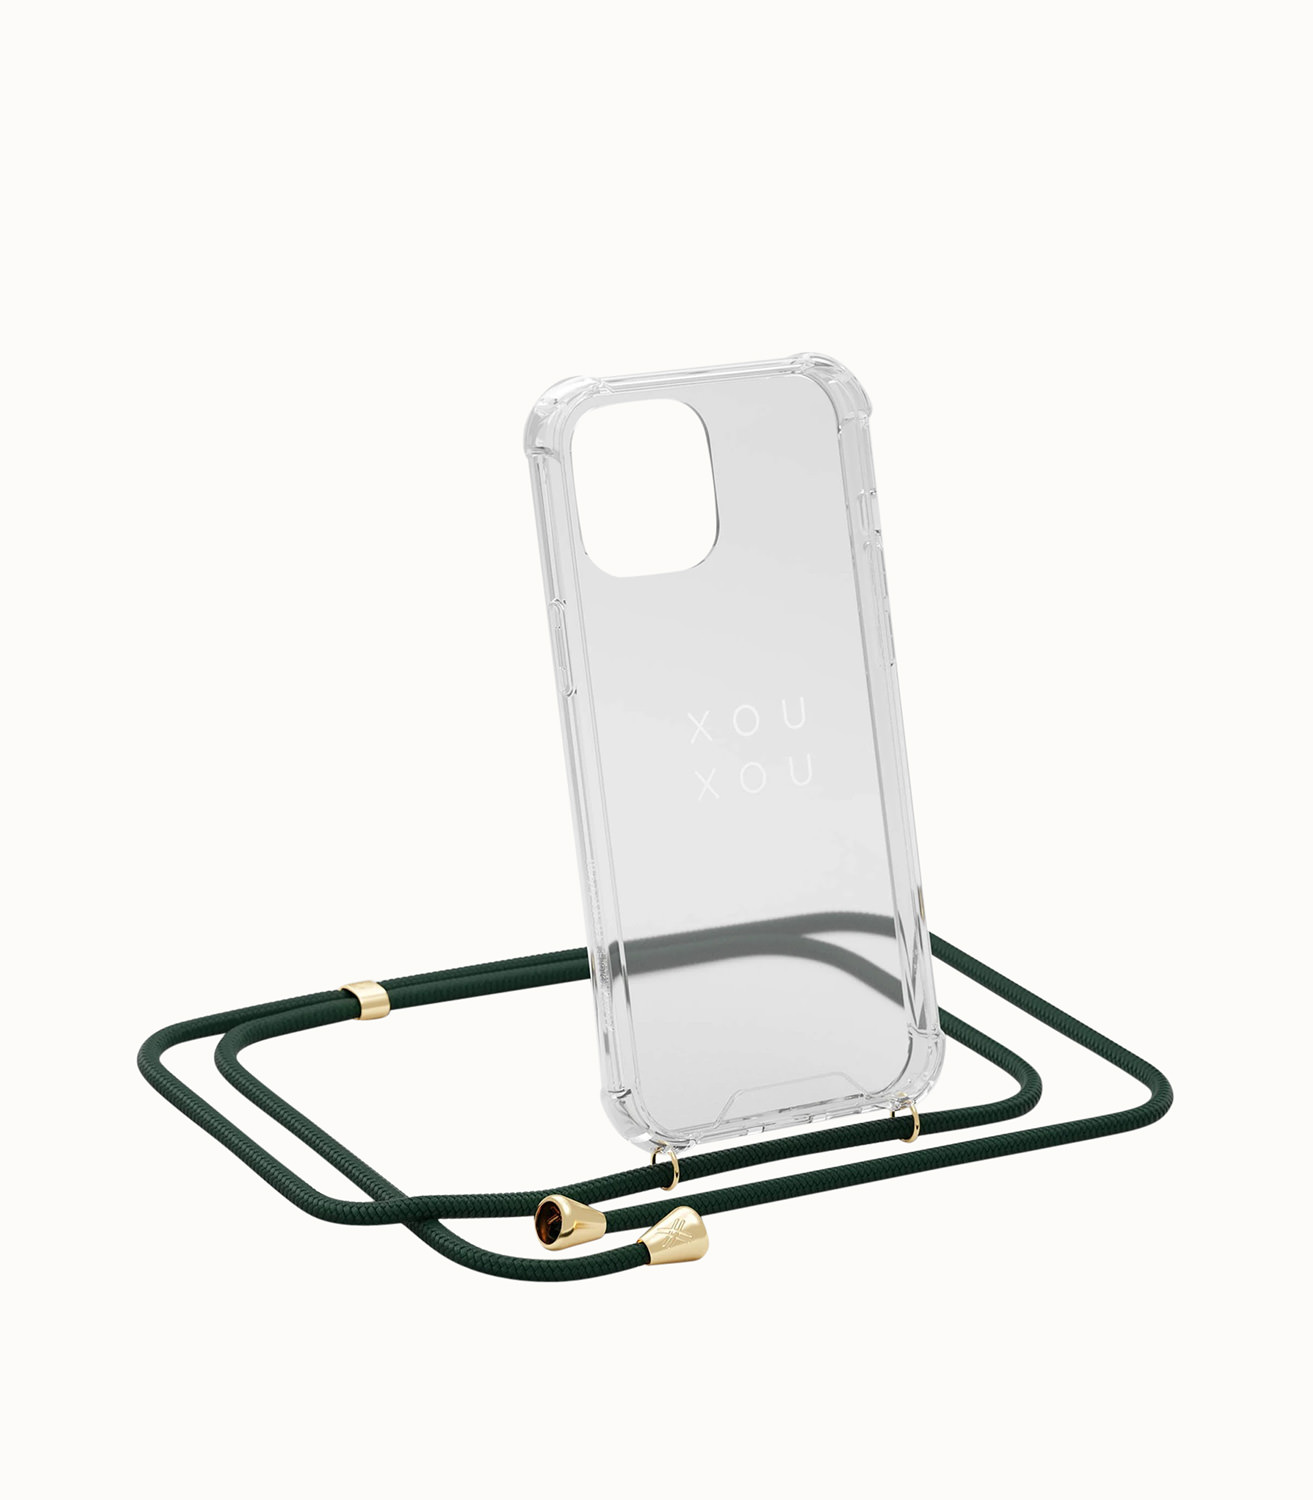 Xouxou Iphone 11 Case Color Green Playground